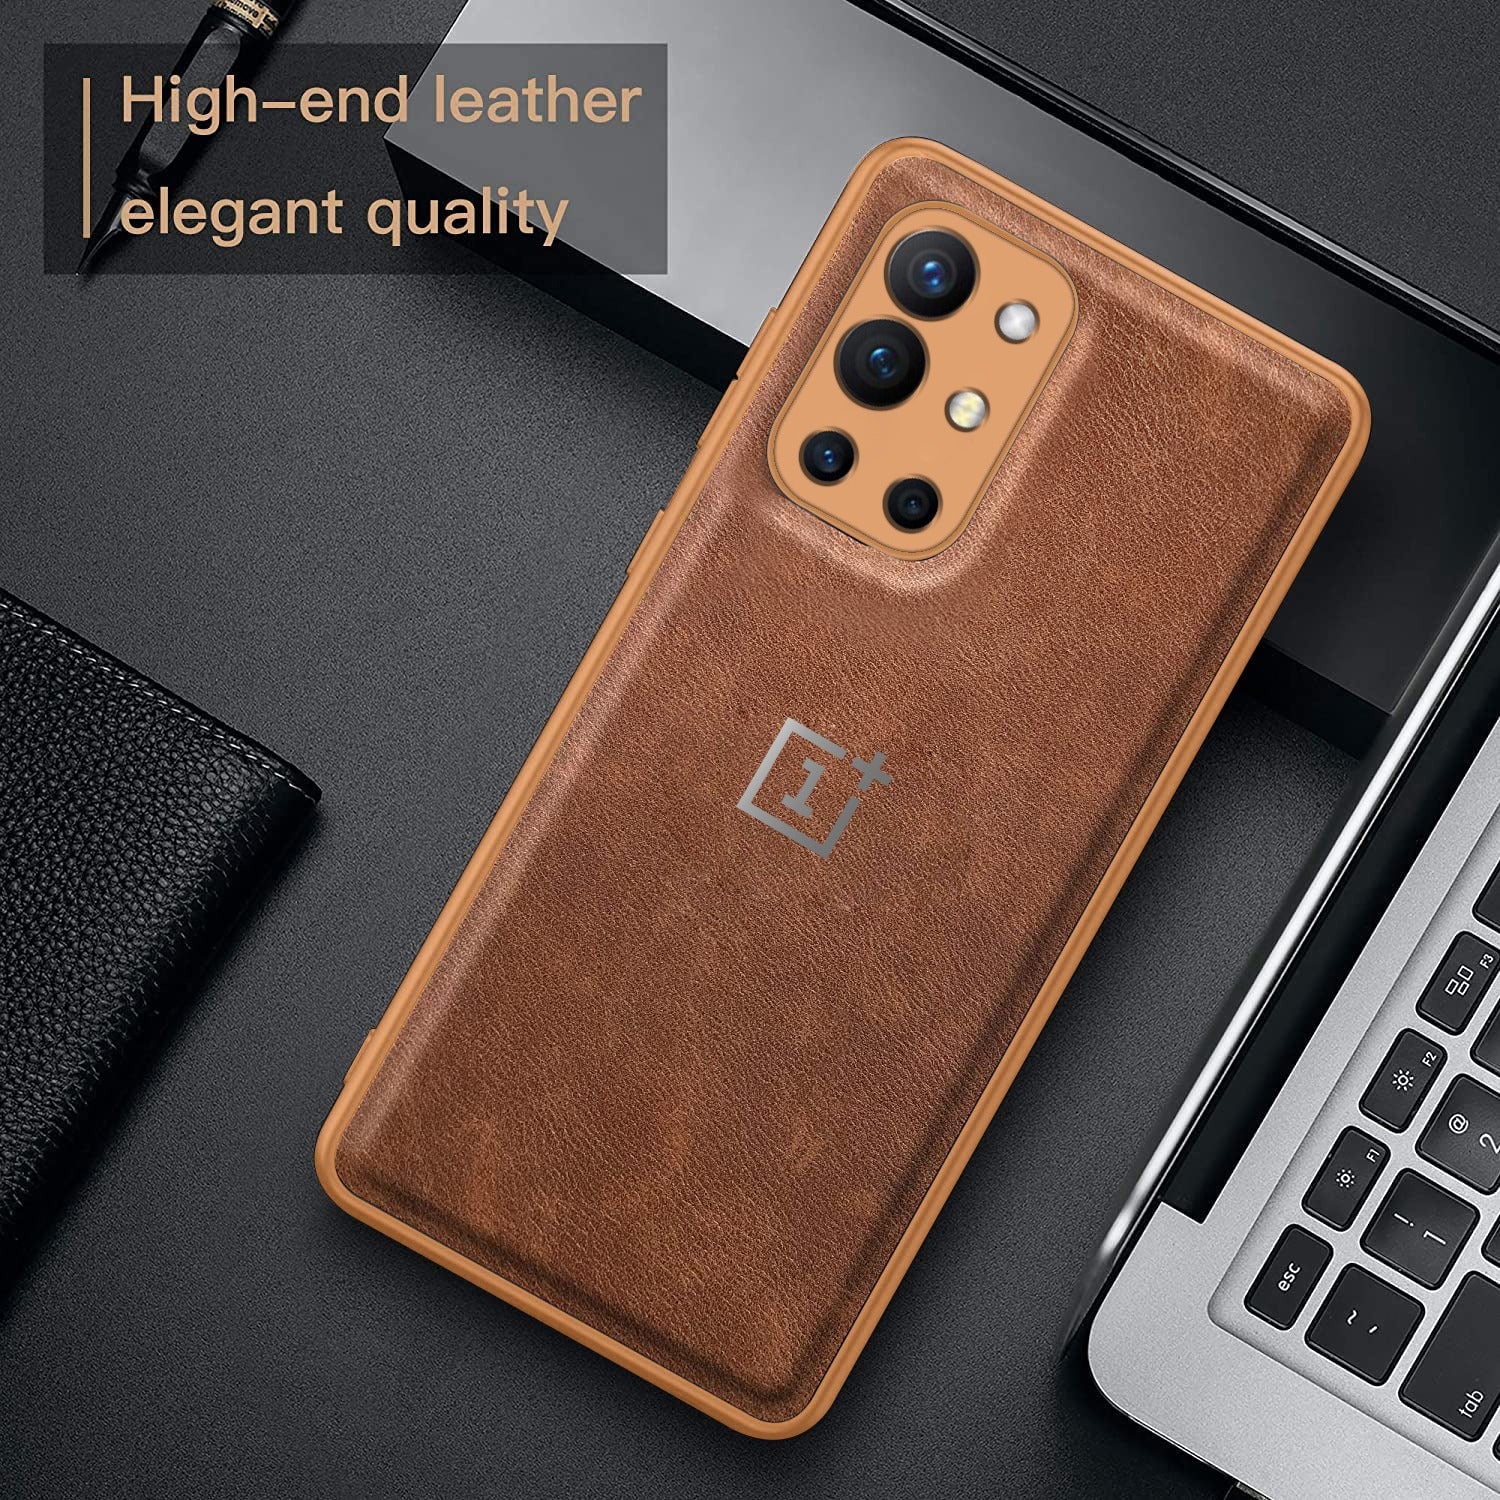 OnePlus 8T/9R 5G VINTAGE PU LEATHER PROTECTIVE BACK CASE